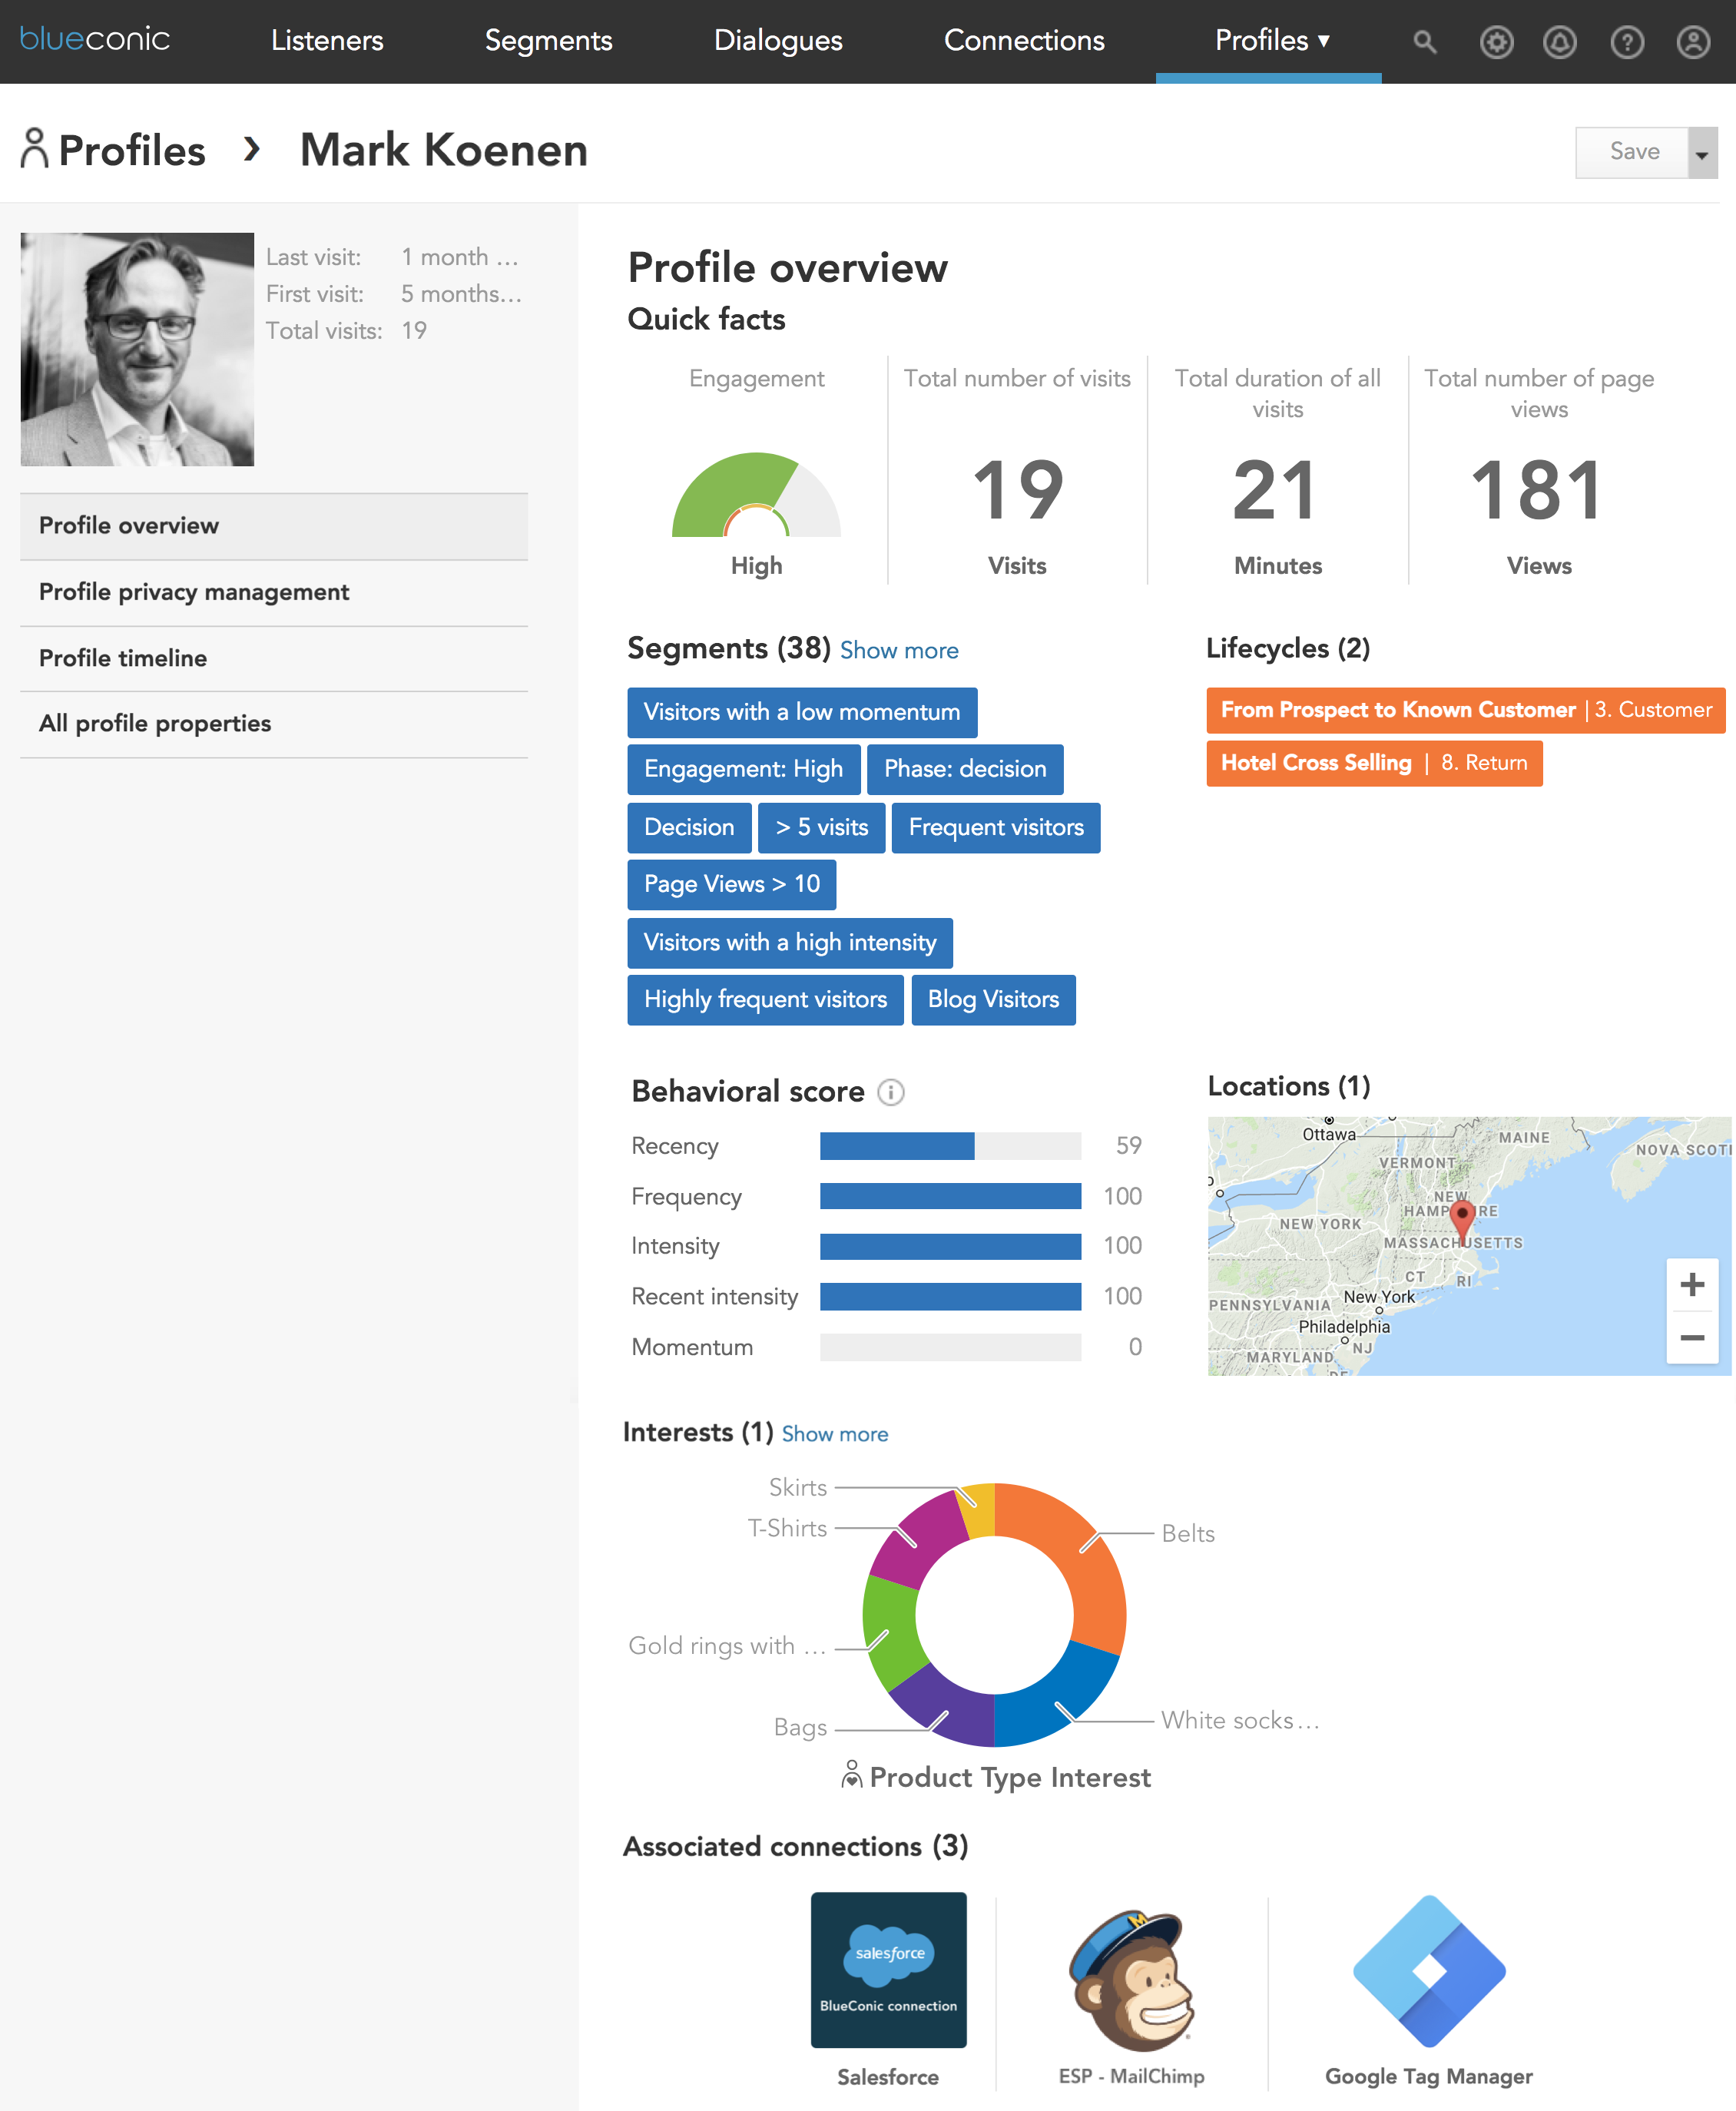 How to see details on real-time customer data in BlueConic customer profiles